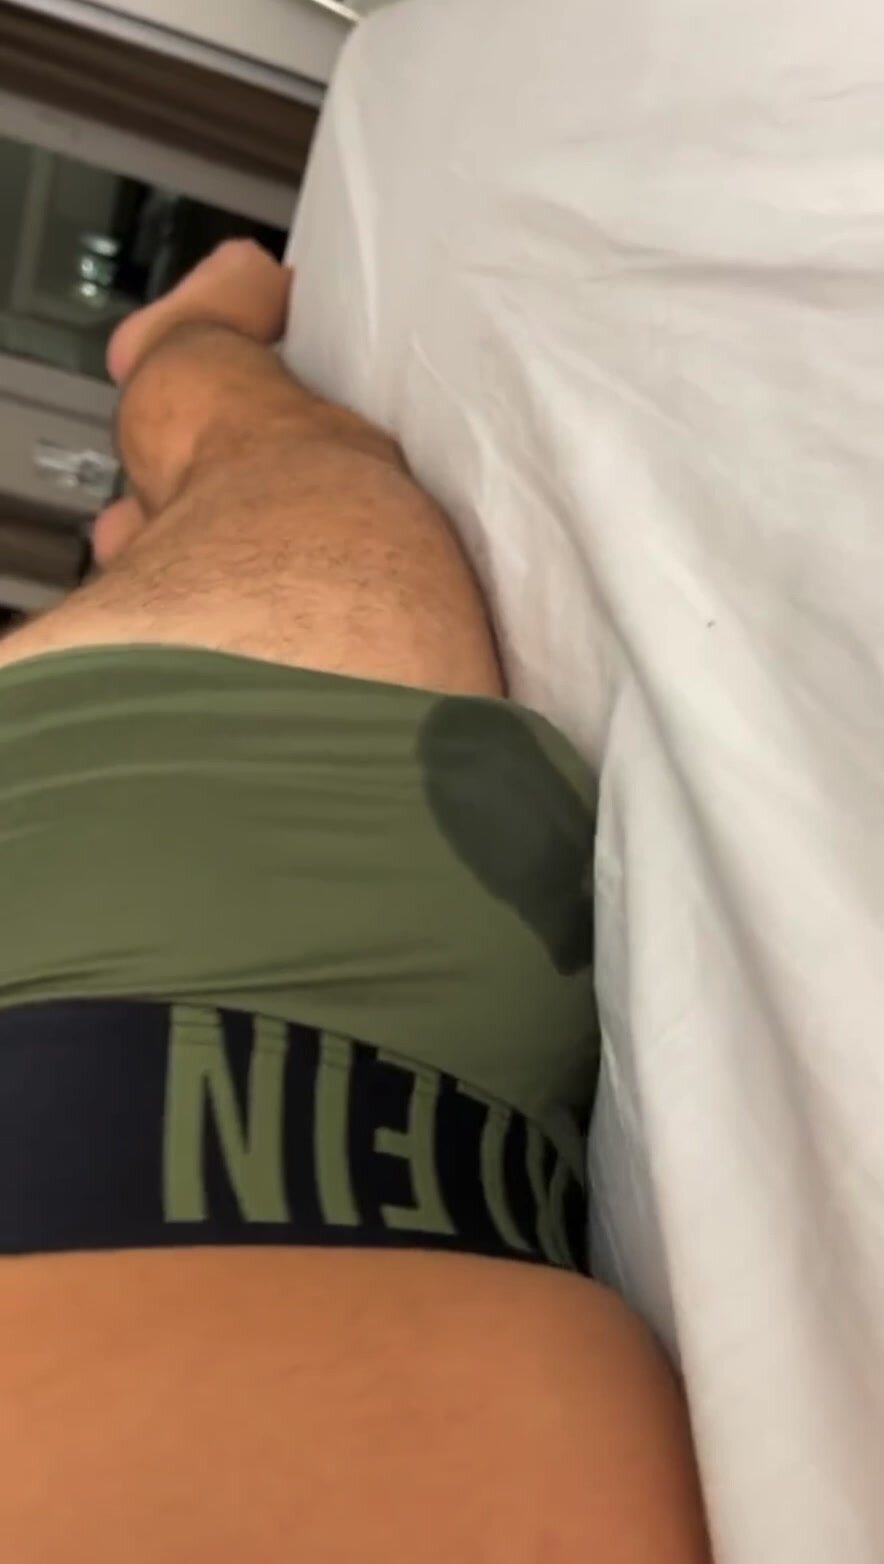 This guy creams underwear with cum while humping bed